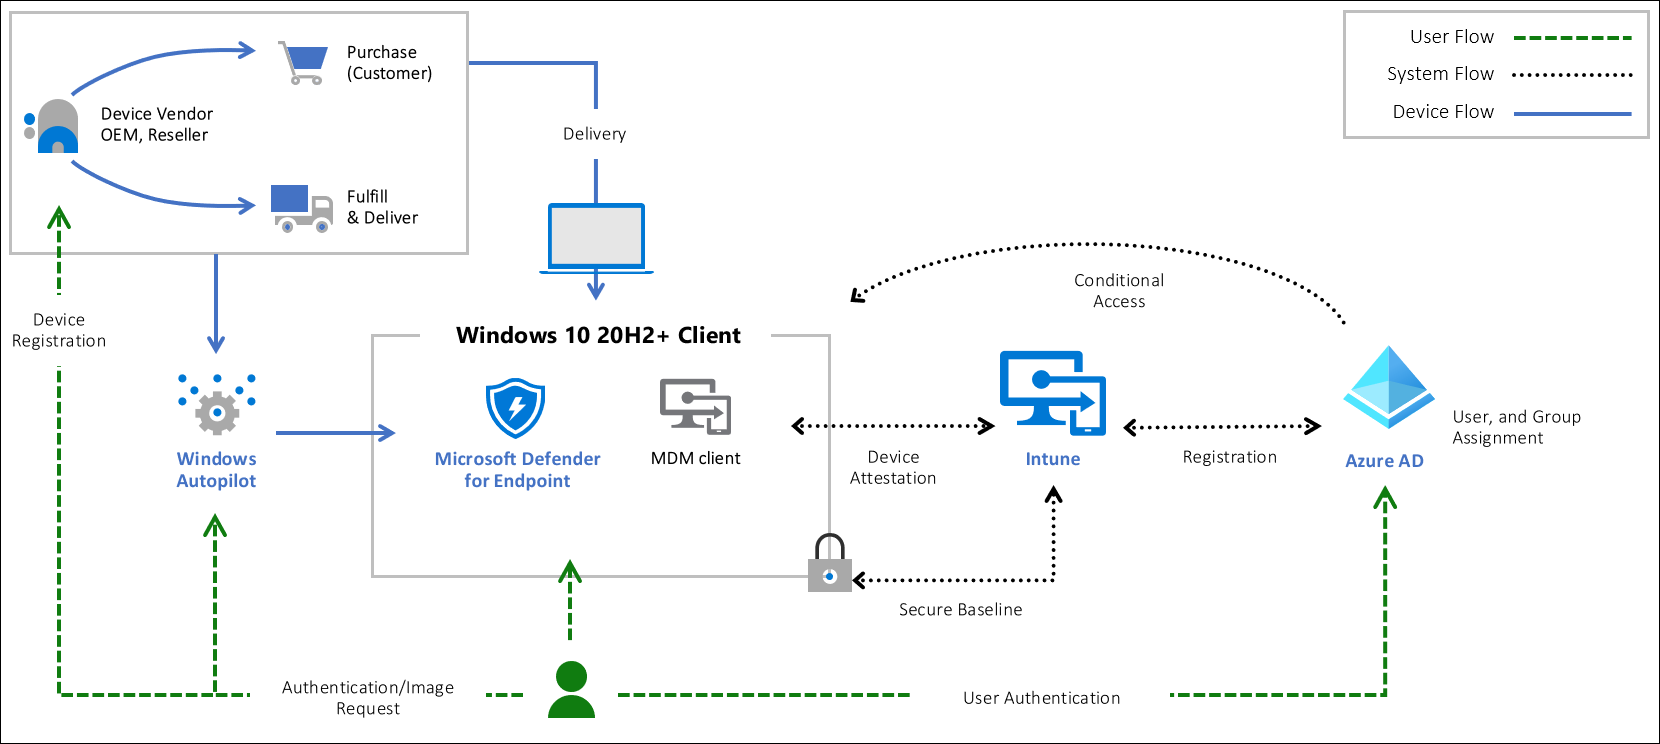 Workflow to acquire and deploy a secure workstation